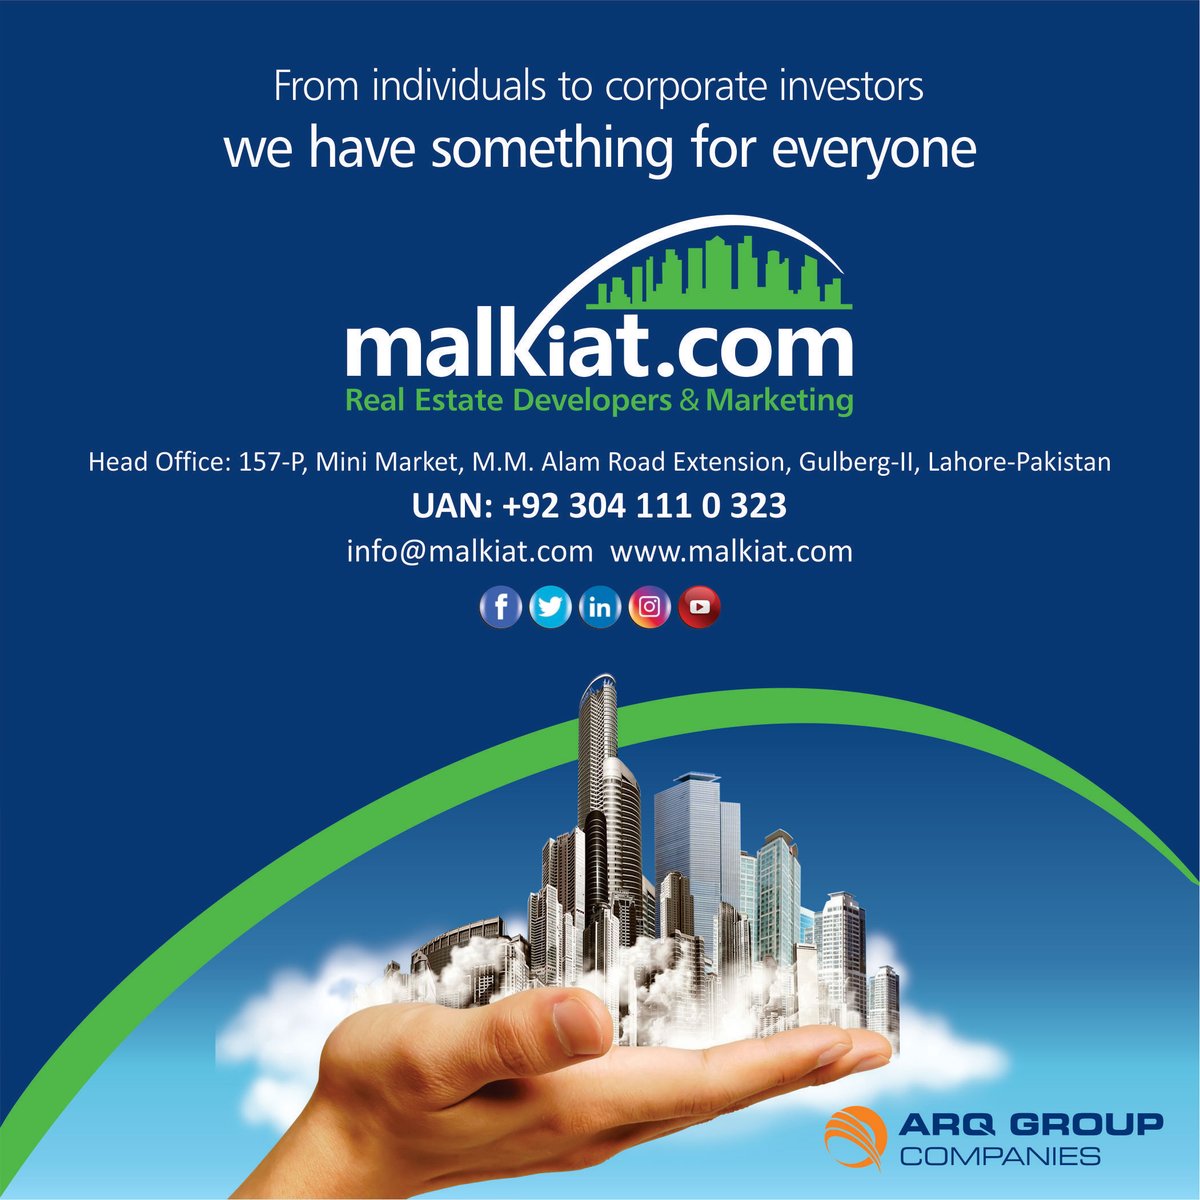 For individuals to corporate investors,
We have something for everyone 

#Malkiat_com #Property #RealEstate #Buy #Sell #Marketing #JointVenture #AcquisitionofLand #HousingSocieties #Malls #CommercialShoppingMalls #ResidentialApartment  #AgricultureLand #GovernmentProjects